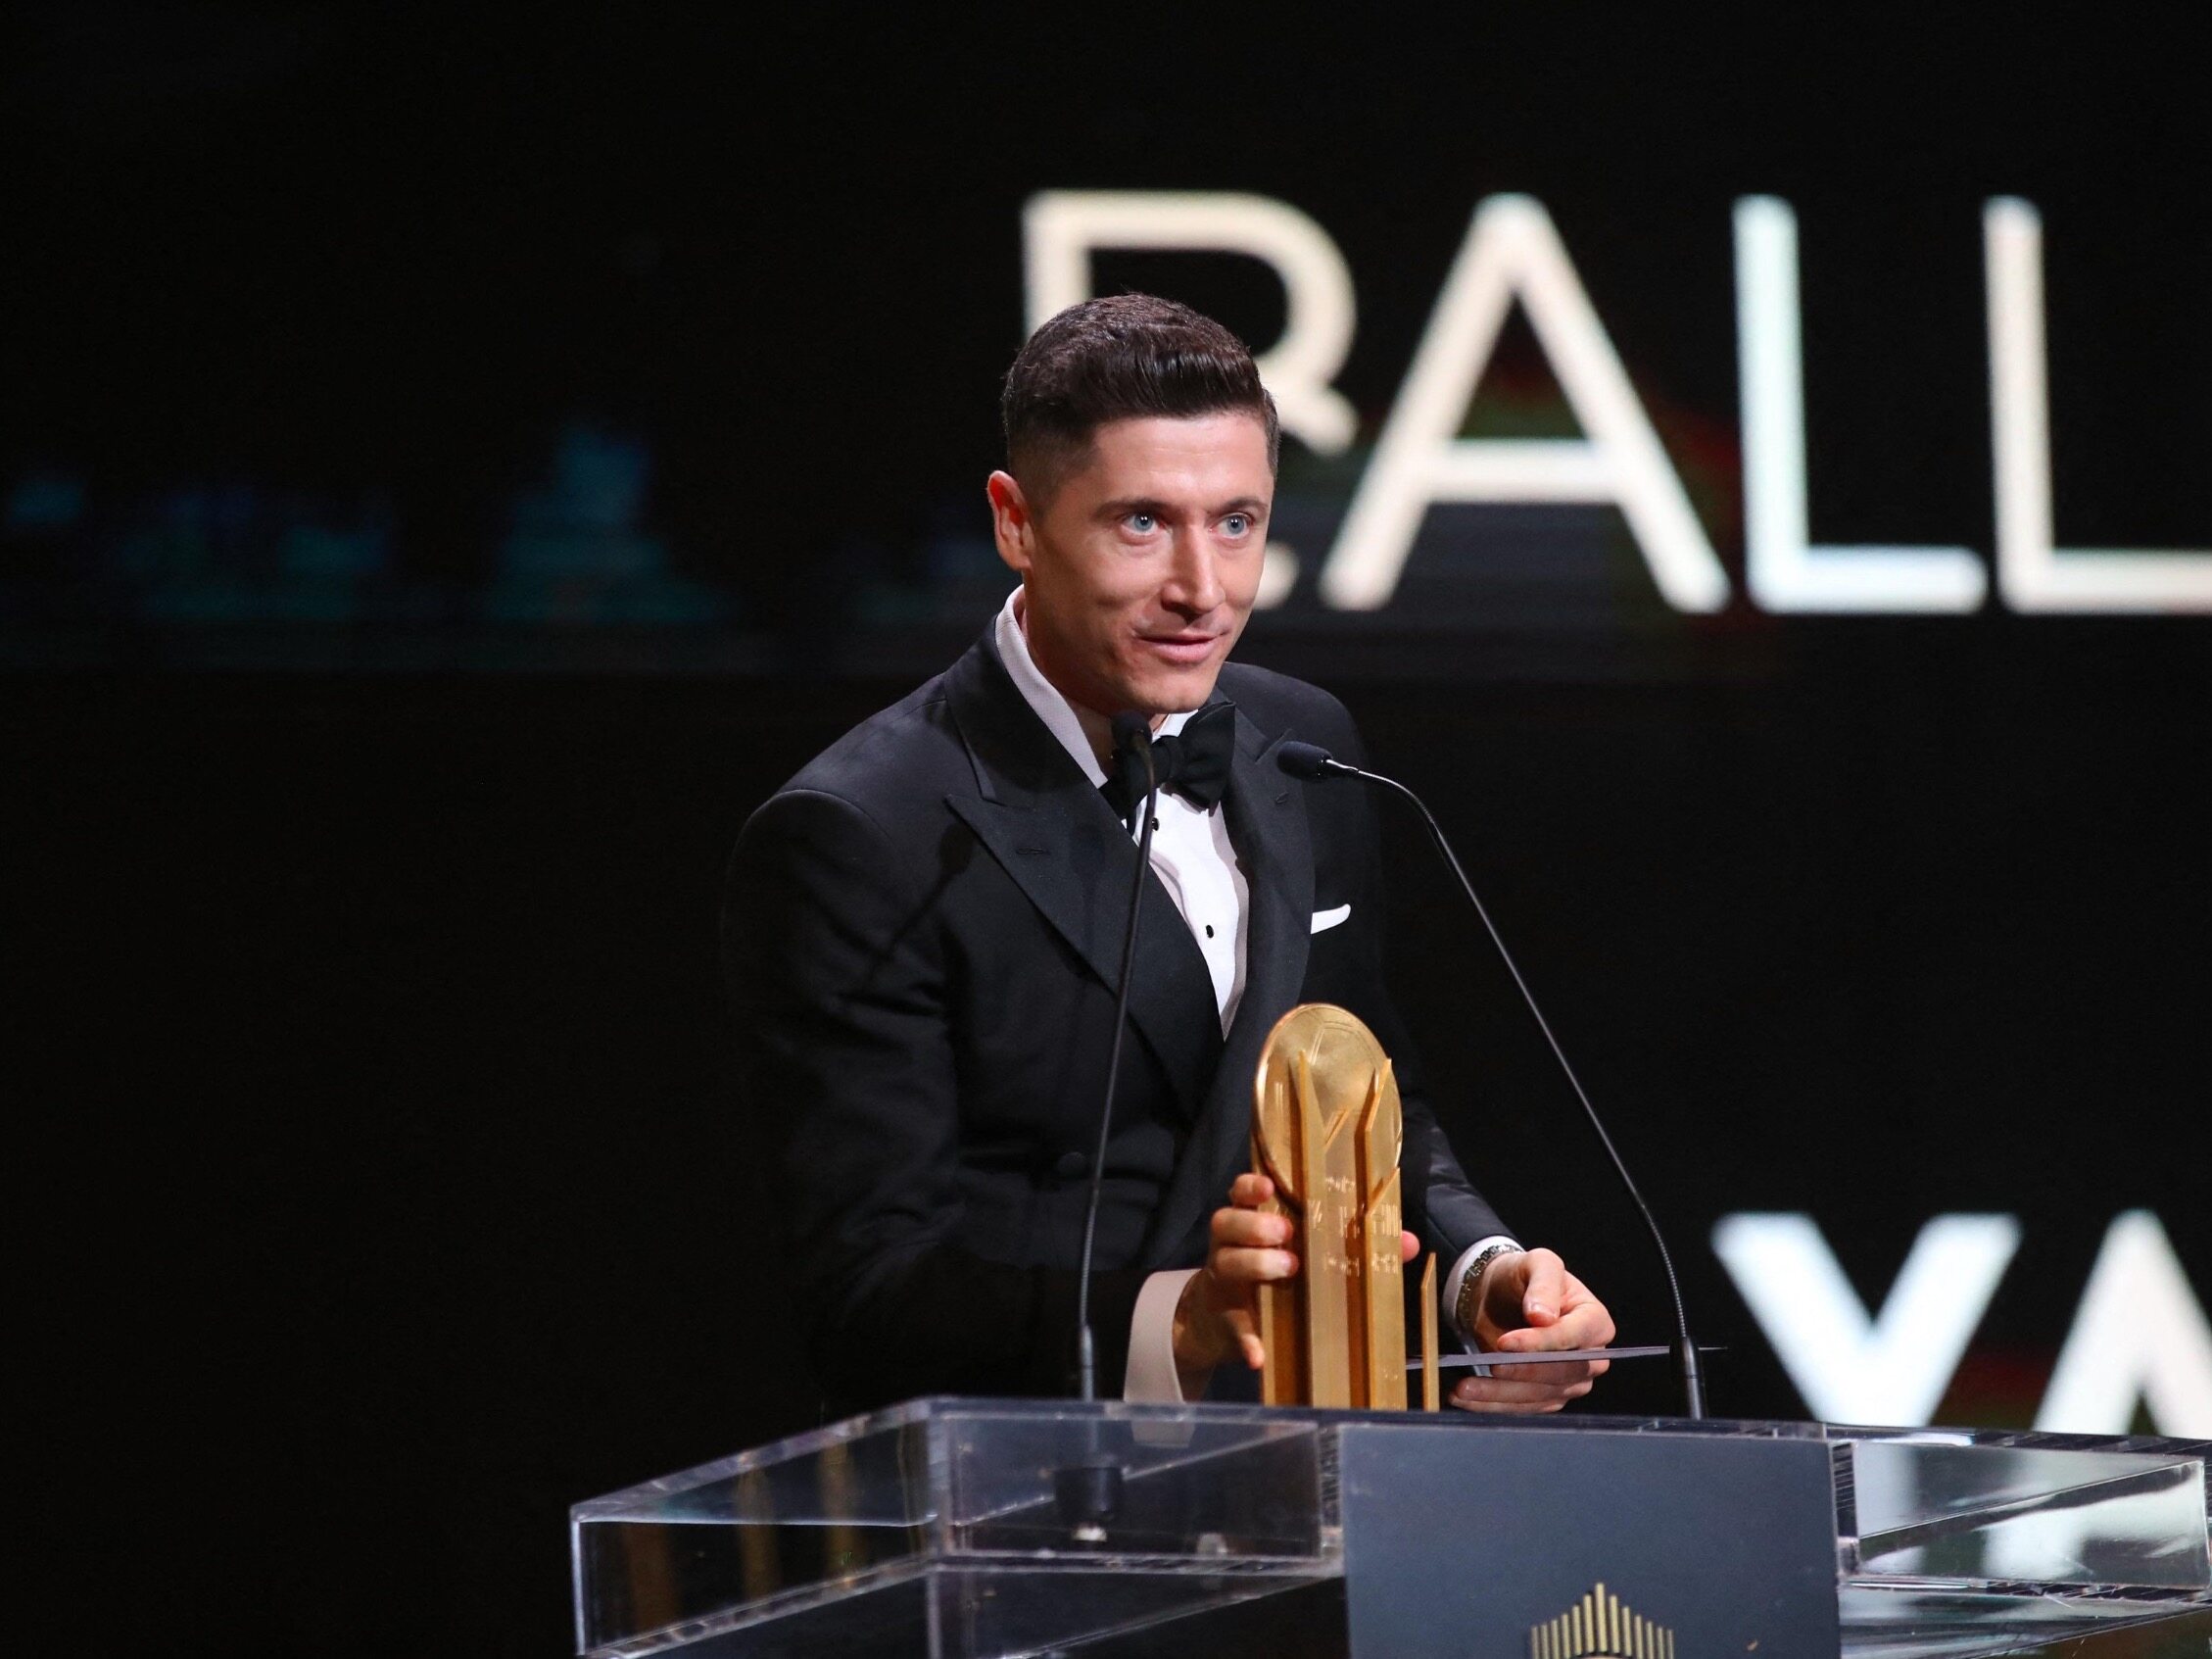 Robert Lewandowski is on his way to the Ballon d'Or again.  Will a Pole appear at the gala?